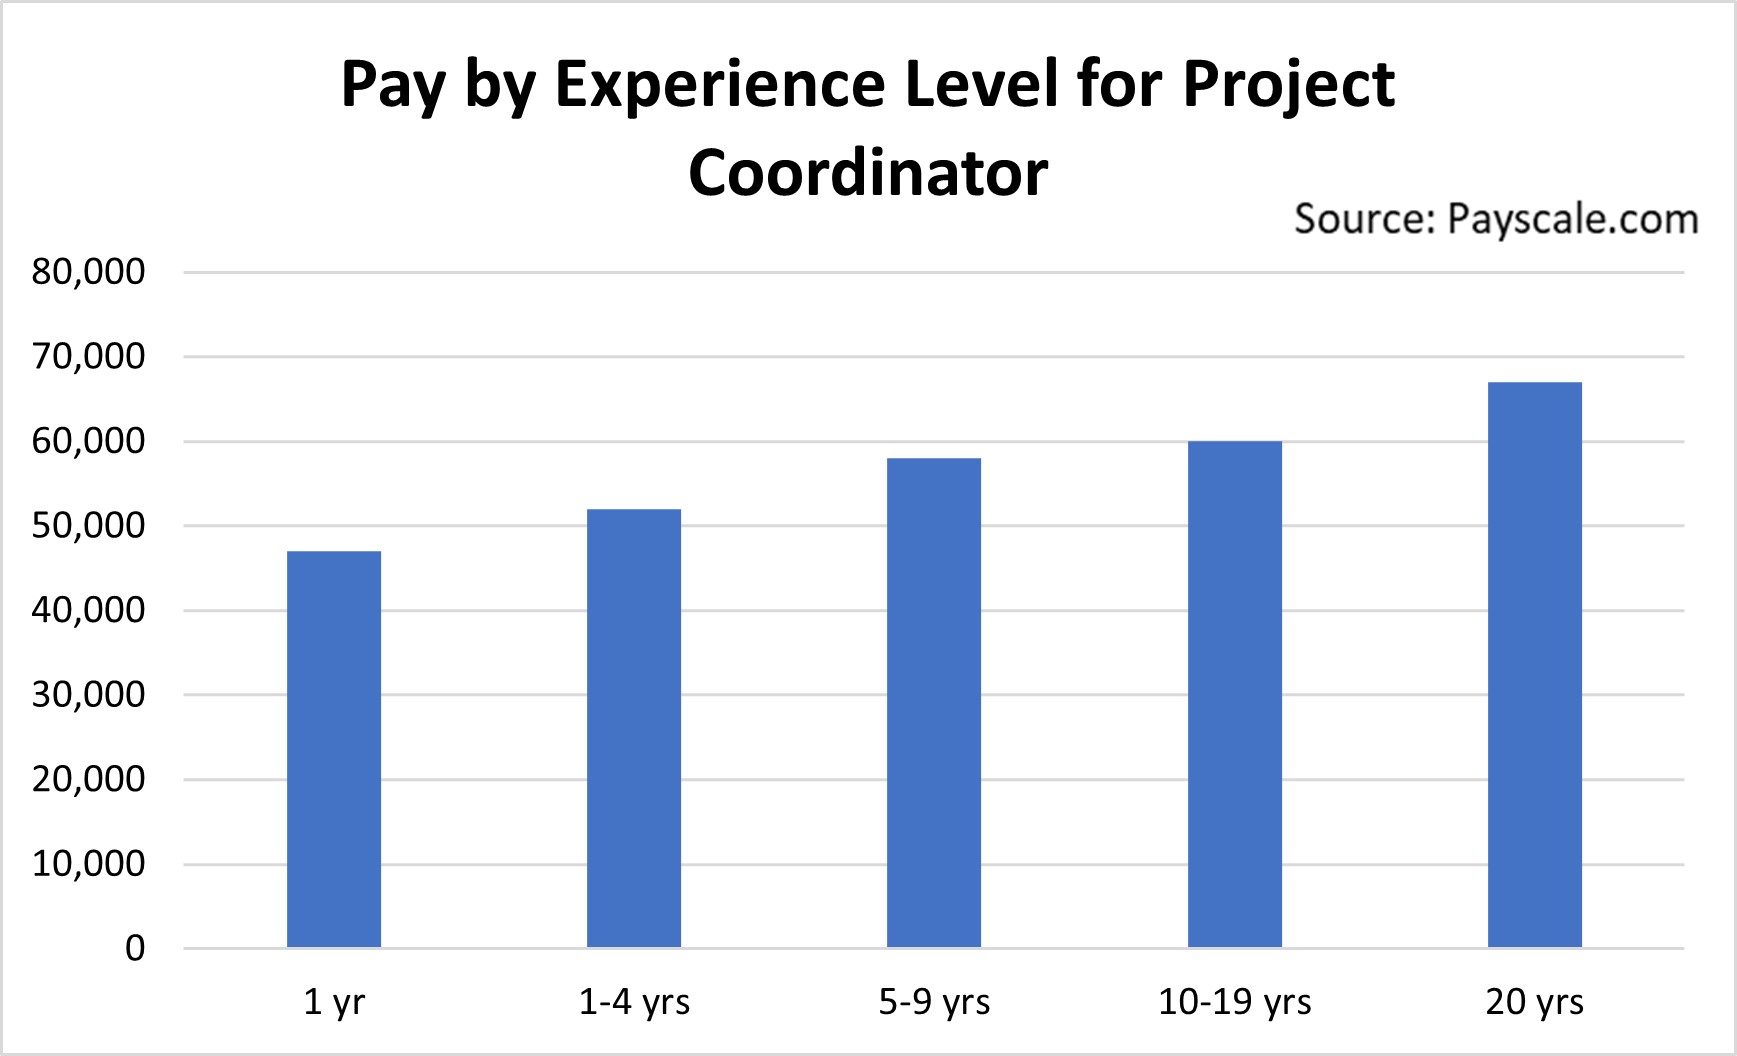 Pay by Experience Level for Project Coordinator